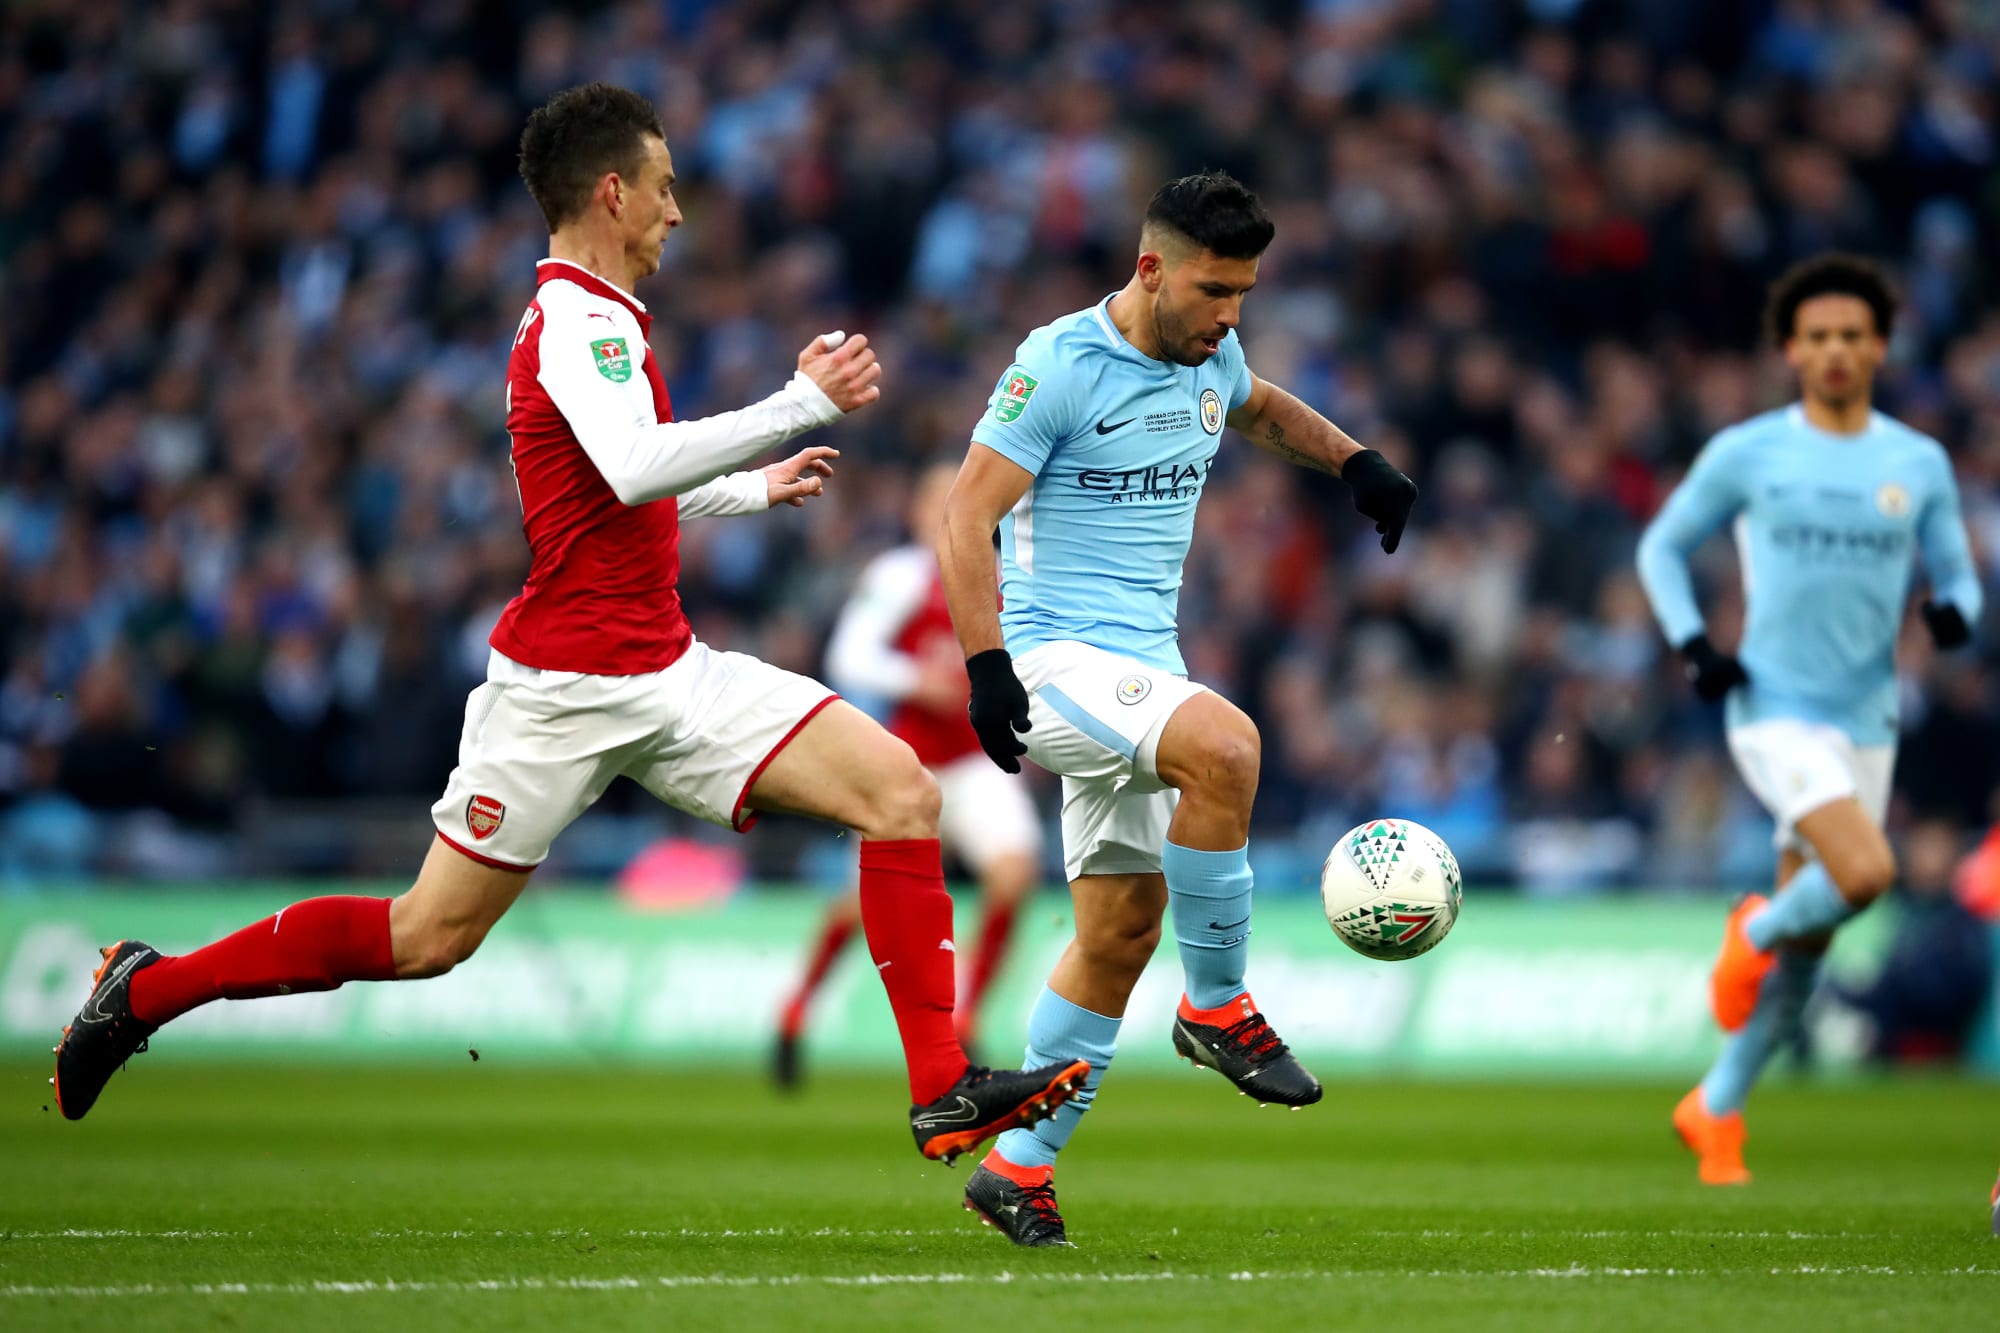 Arsenal Vs Manchester City Highlights and analysis Humiliation